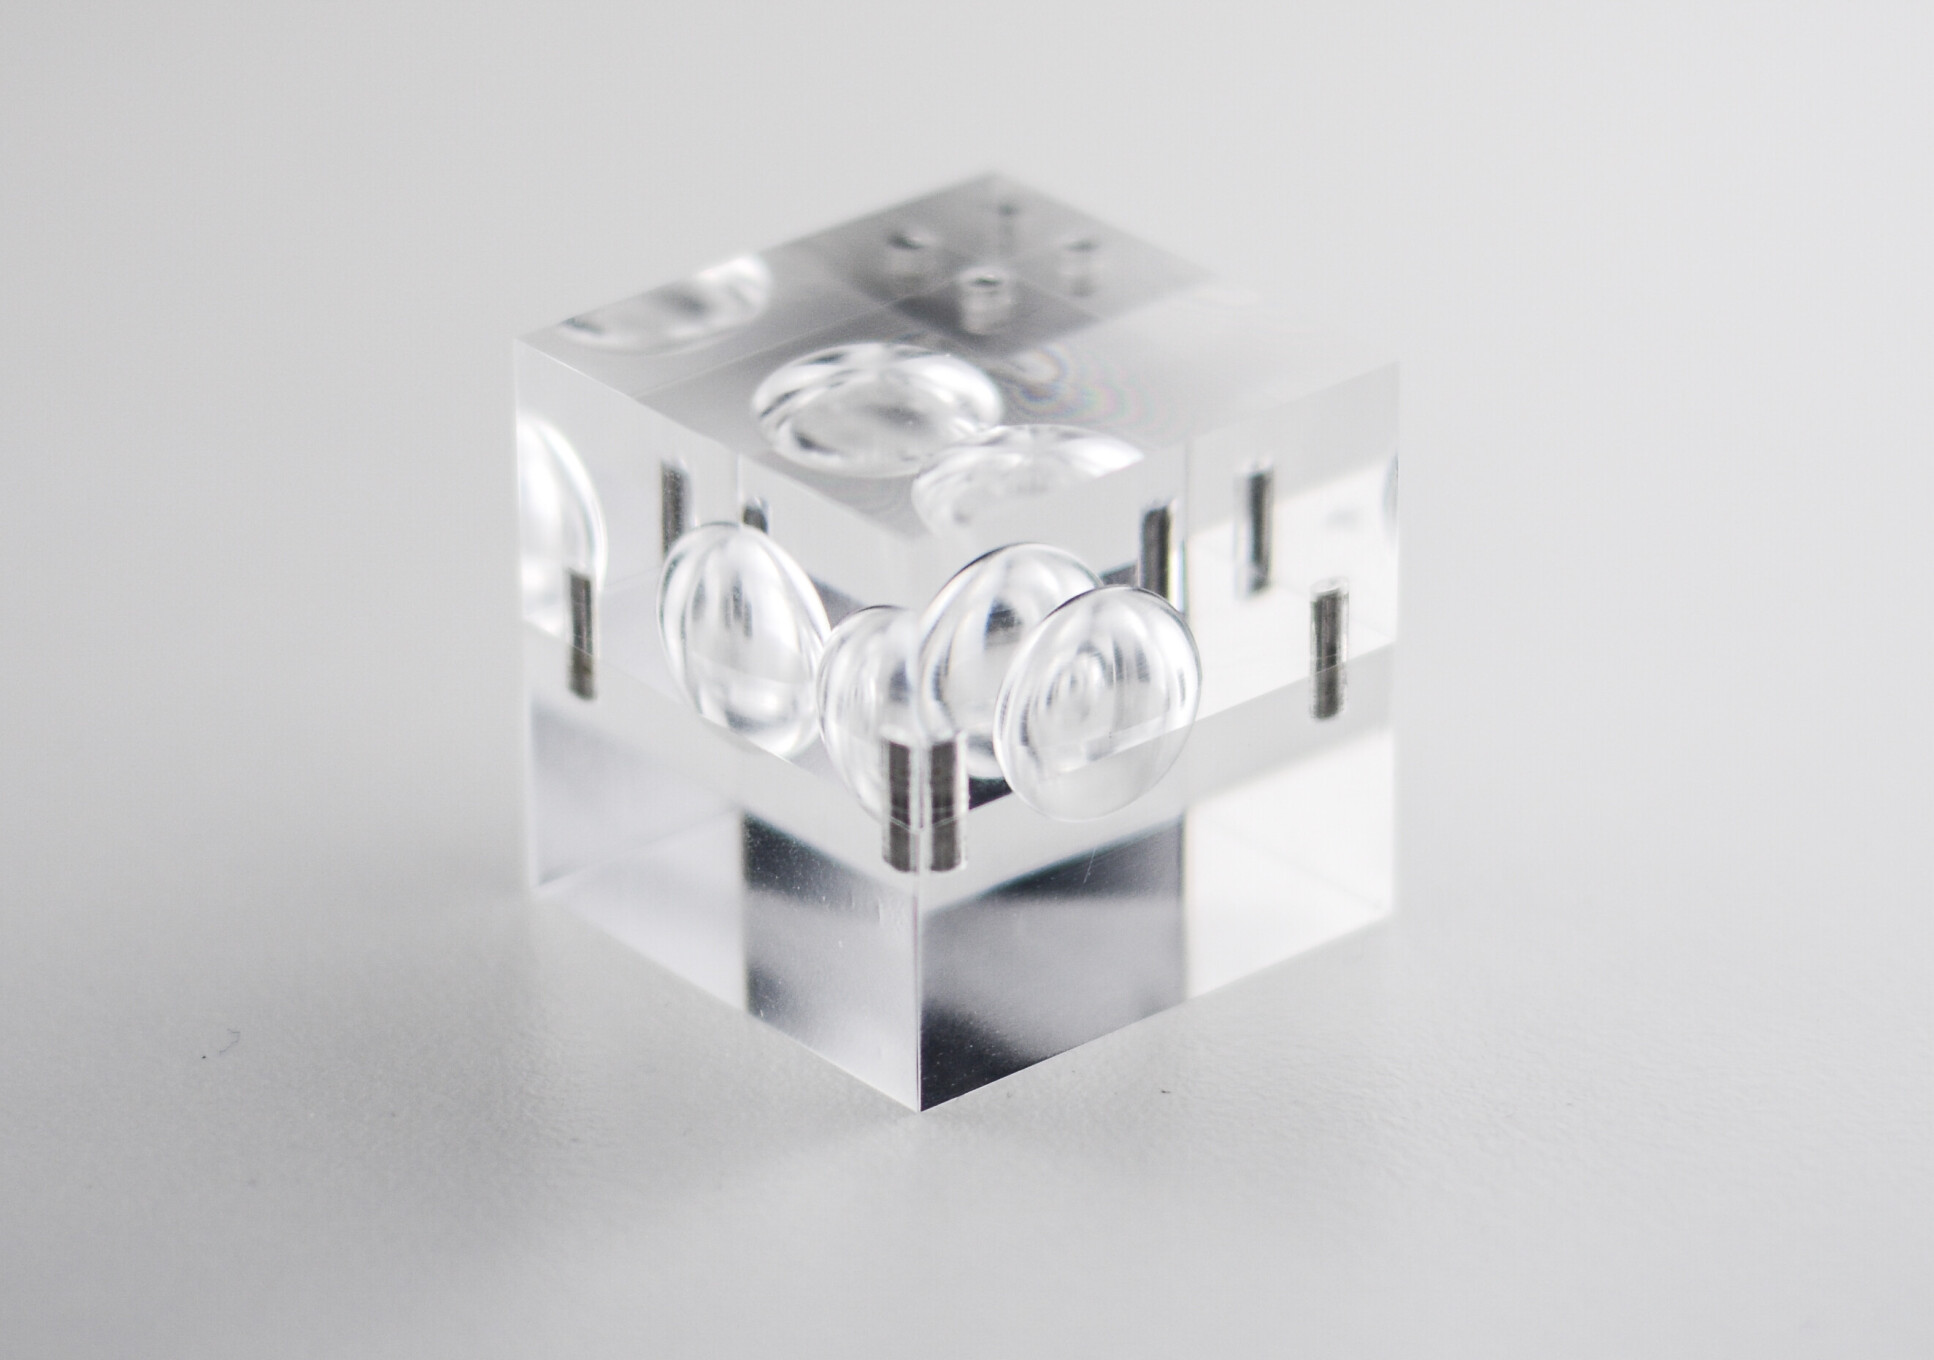 A cube shaped object